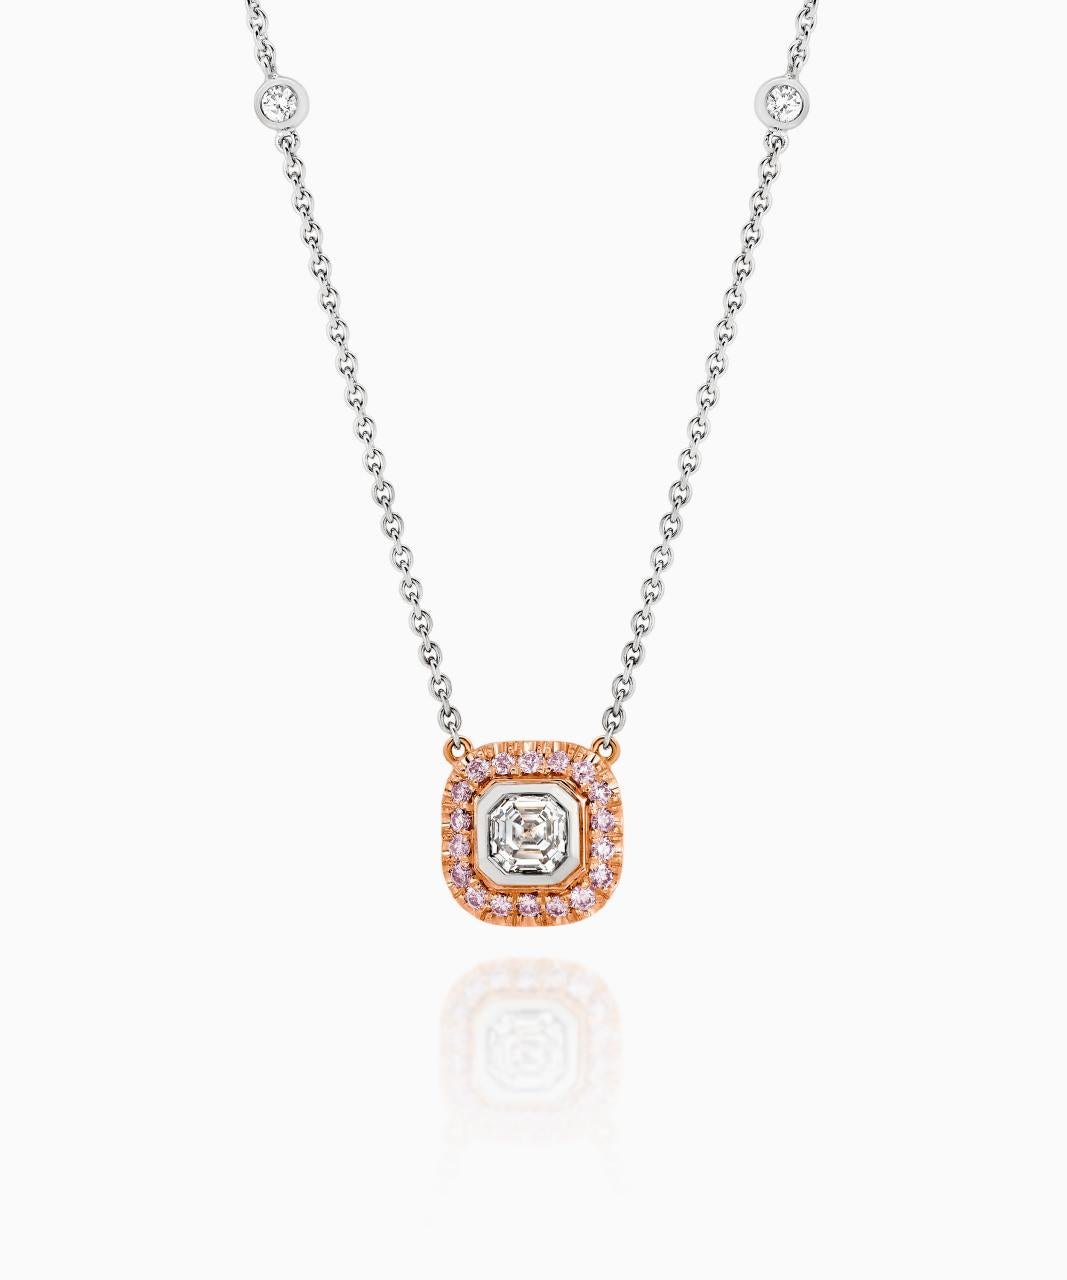 Lucie White and Argyle Pink Diamond Necklace